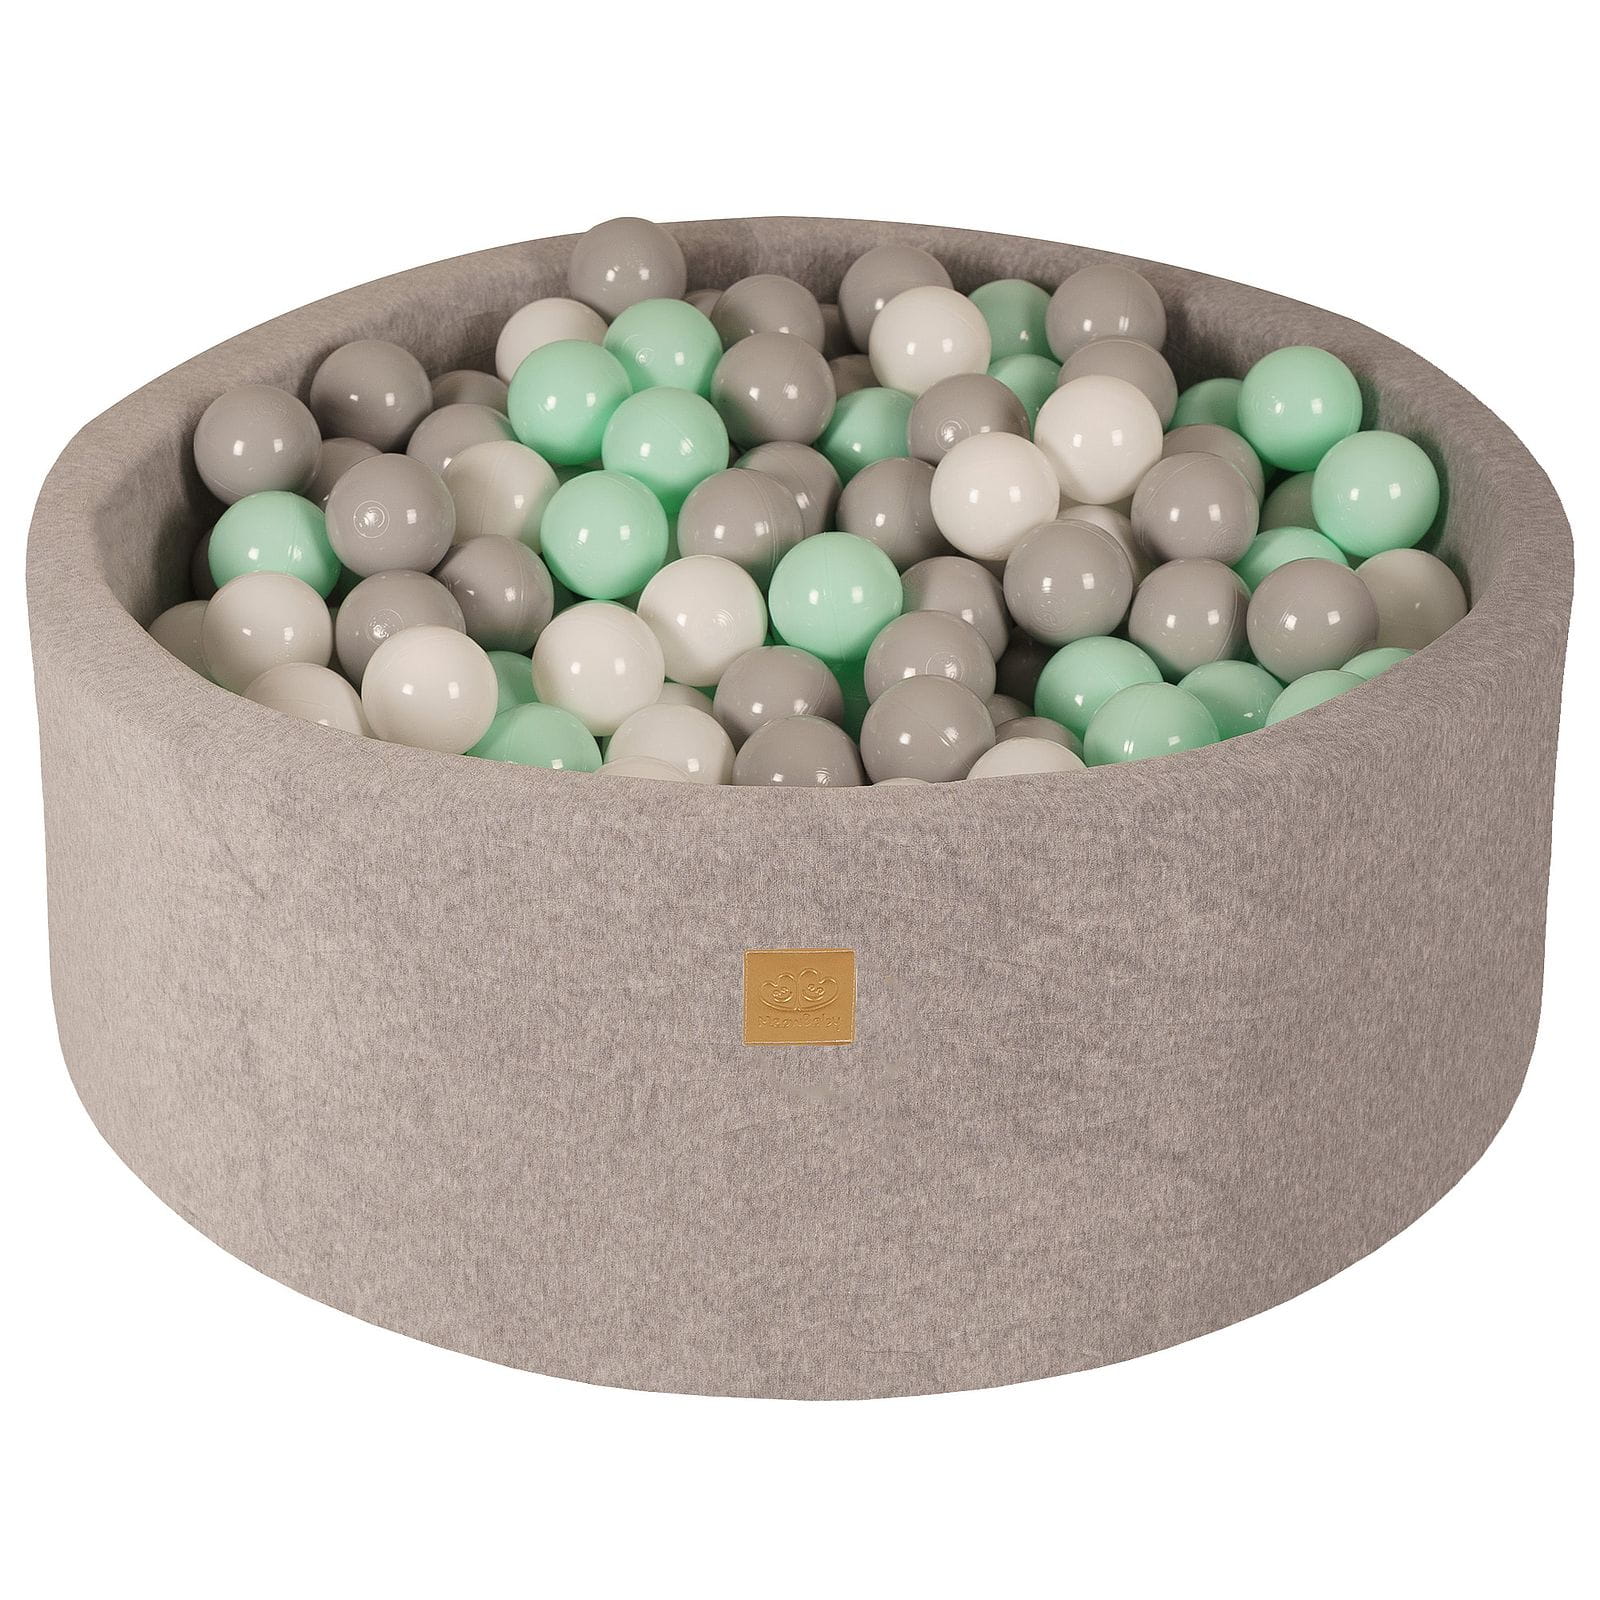 MEOWBABY� Ball Pit with 200 Balls 2.75in Included for Toddlers - Baby Soft Foam Round Playpen, Velvet, Light Gray: White/Gray/Mint